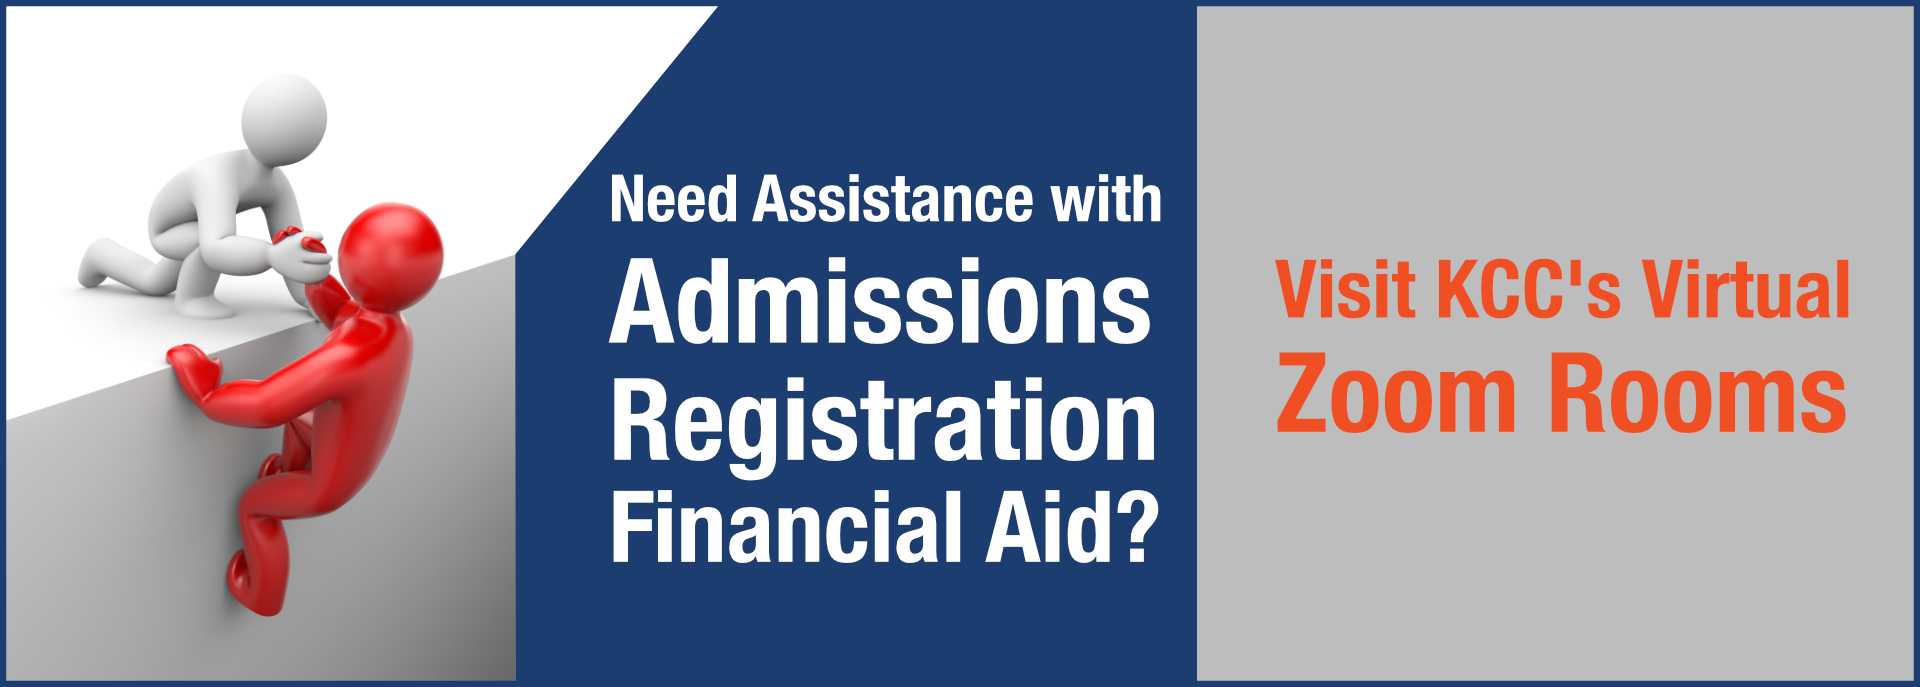 Need Assistance with Admissions, Registration, Financial Aid and more?